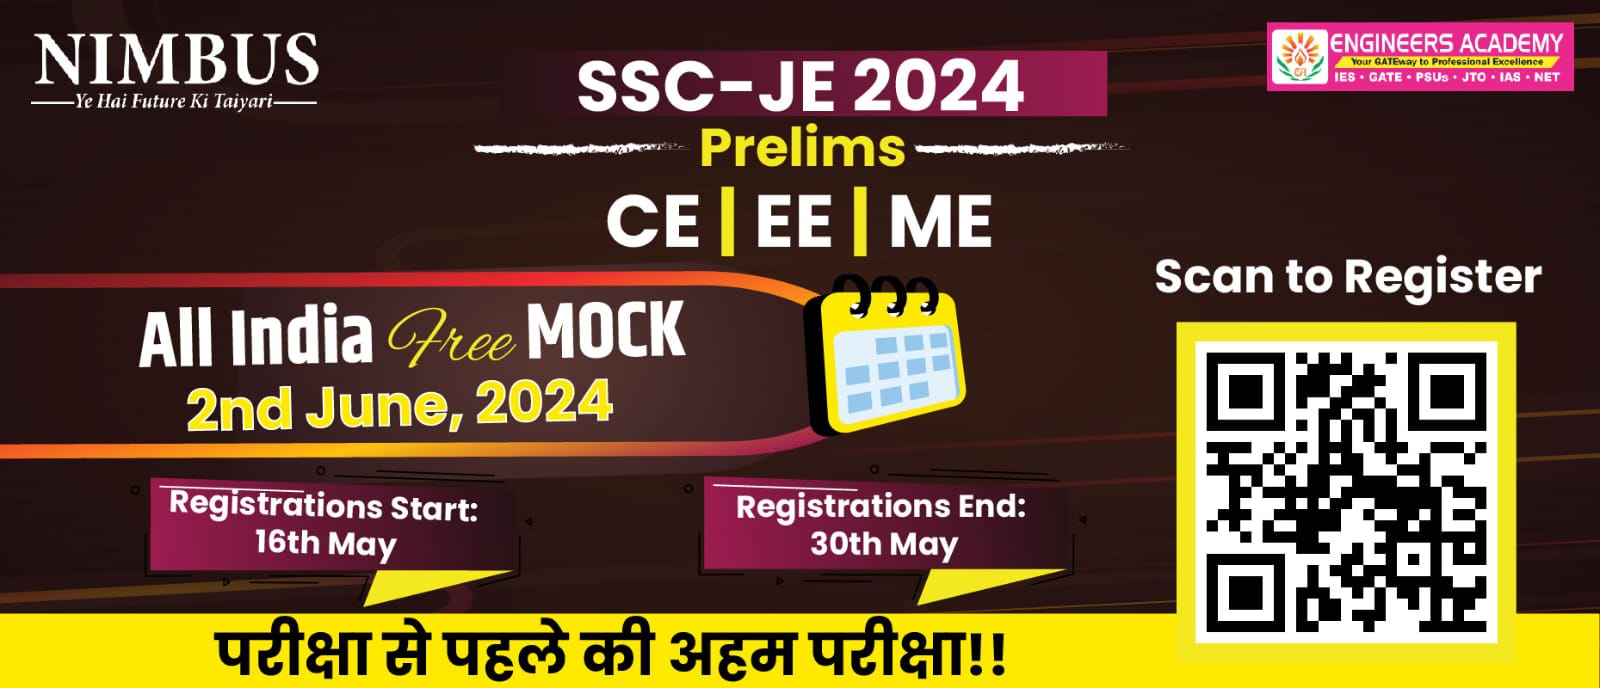 SSC JE All India Free Mock Test